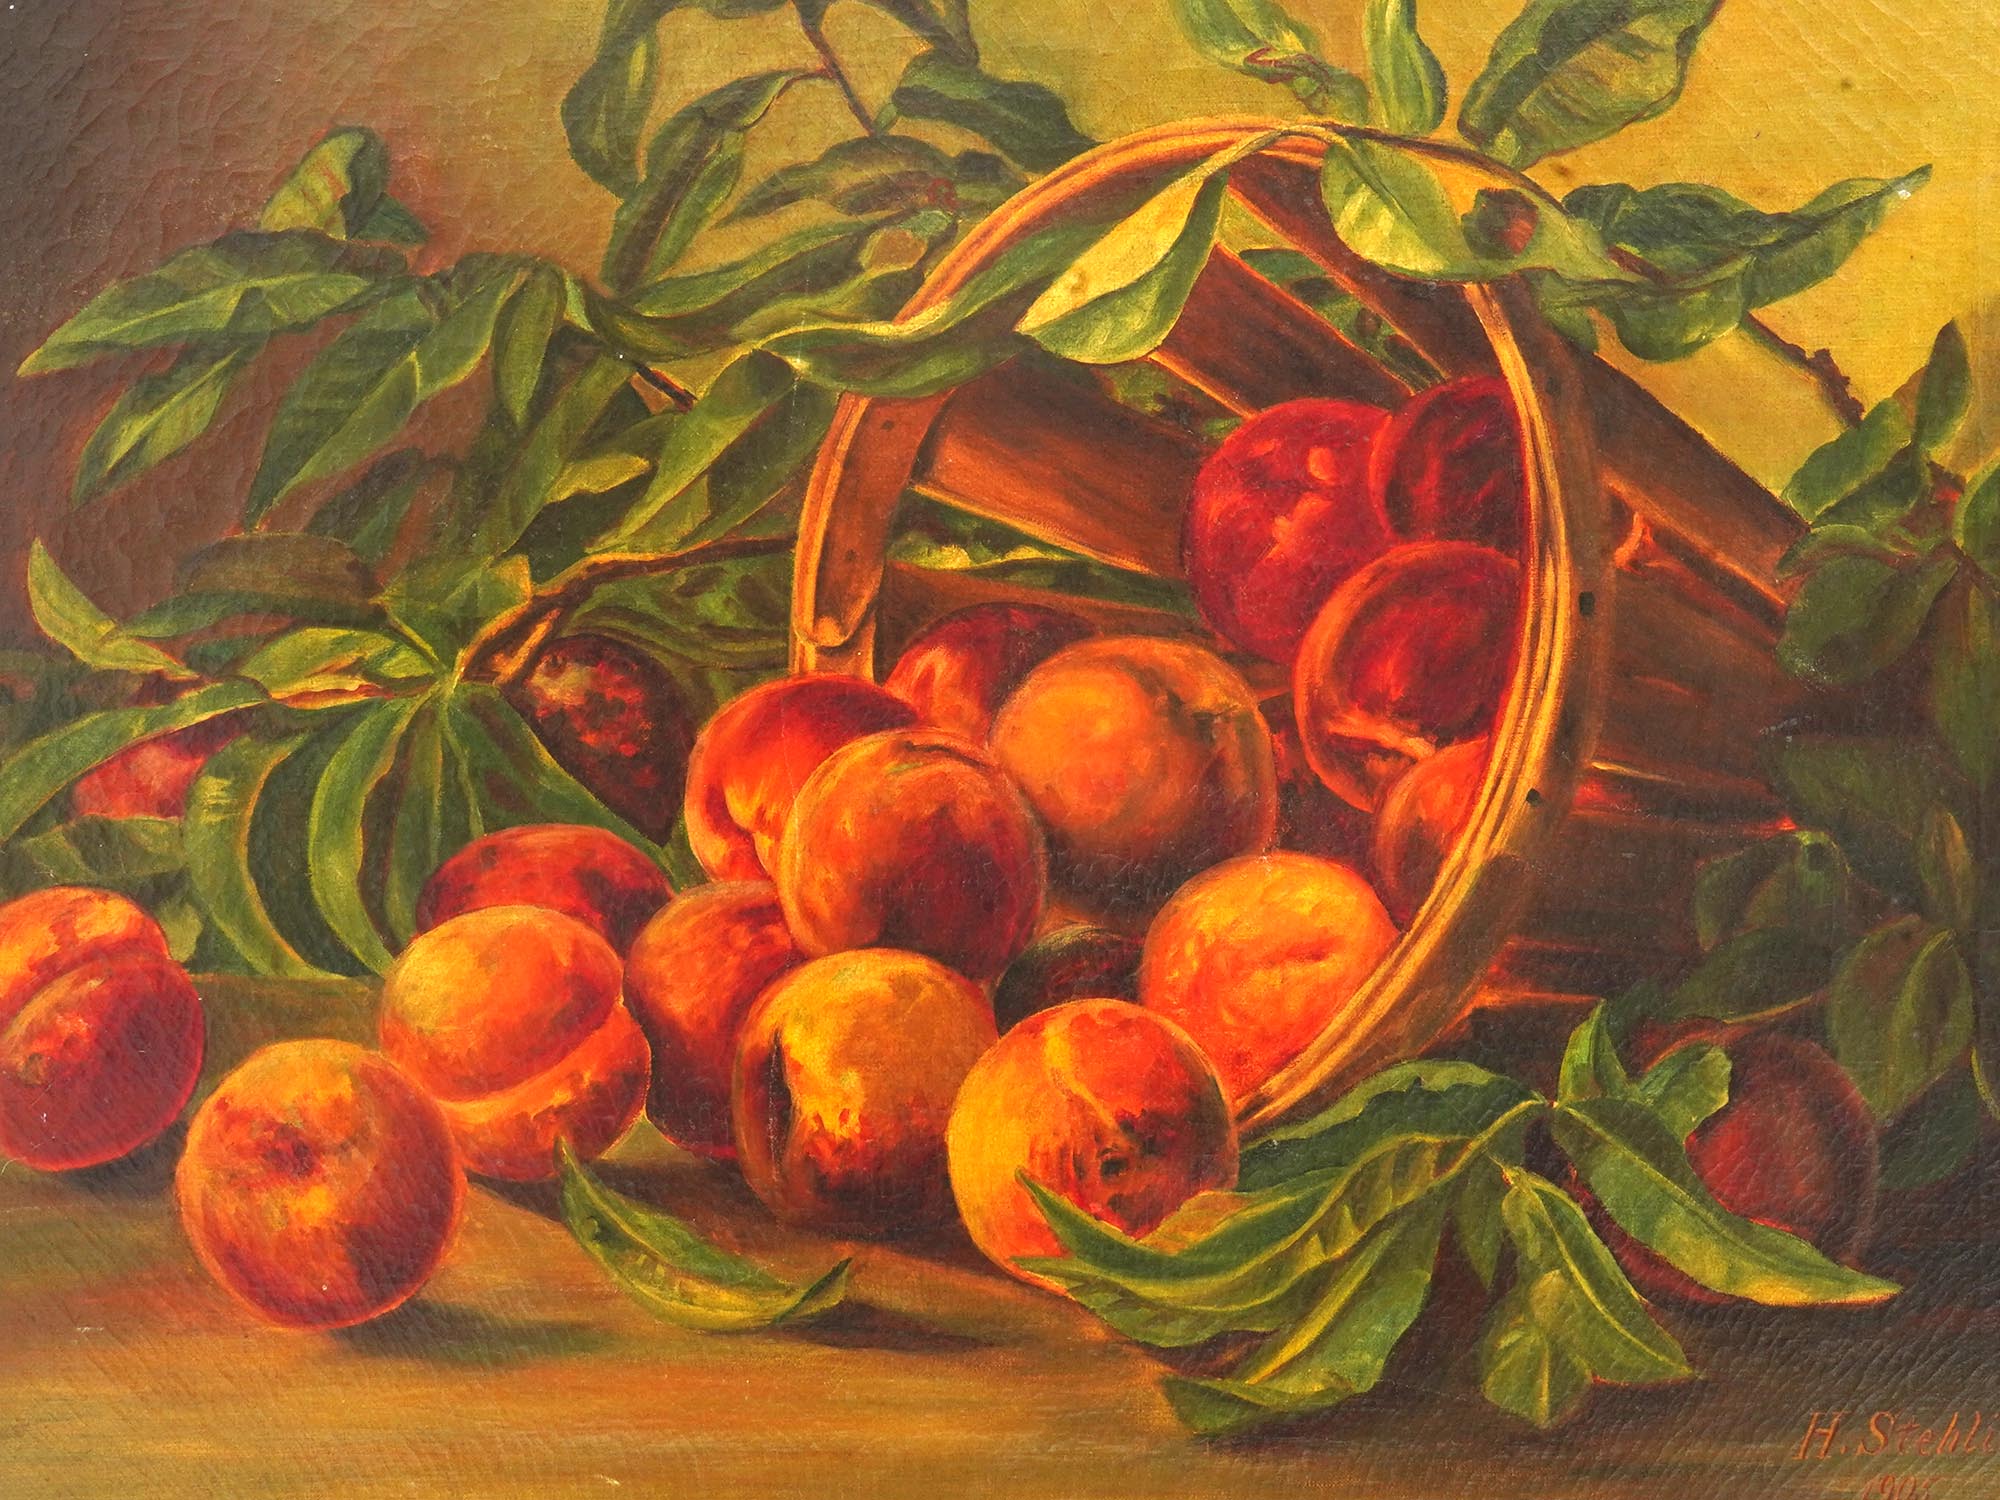 ANTIQUE AMERICAN STILL LIFE OIL PAINTING BY STEHLIN PIC-1